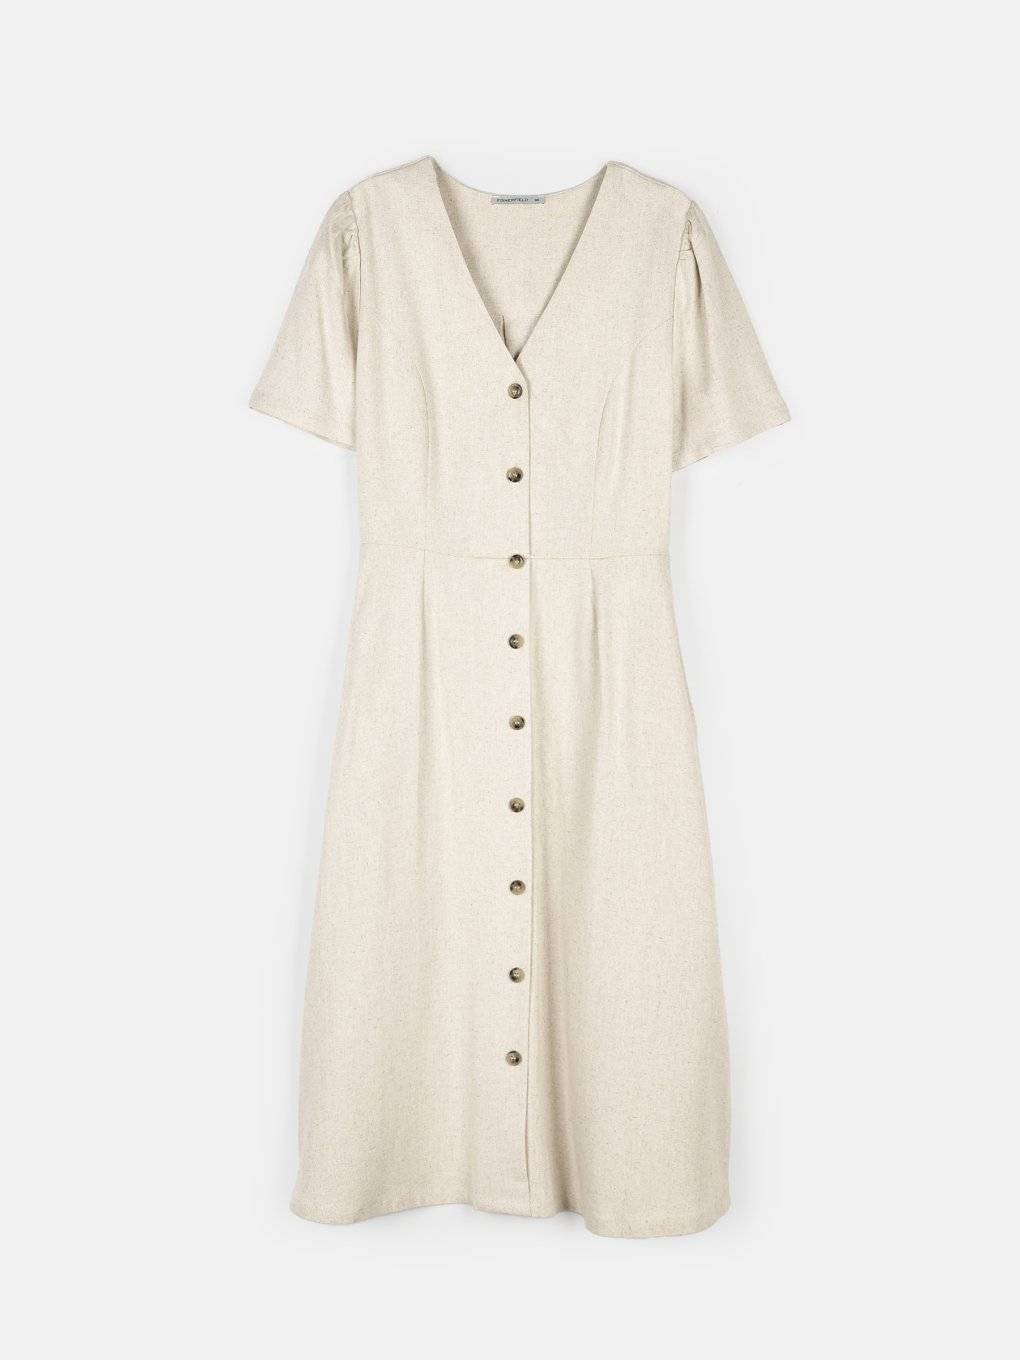 Ladies V-neck dress with buttons